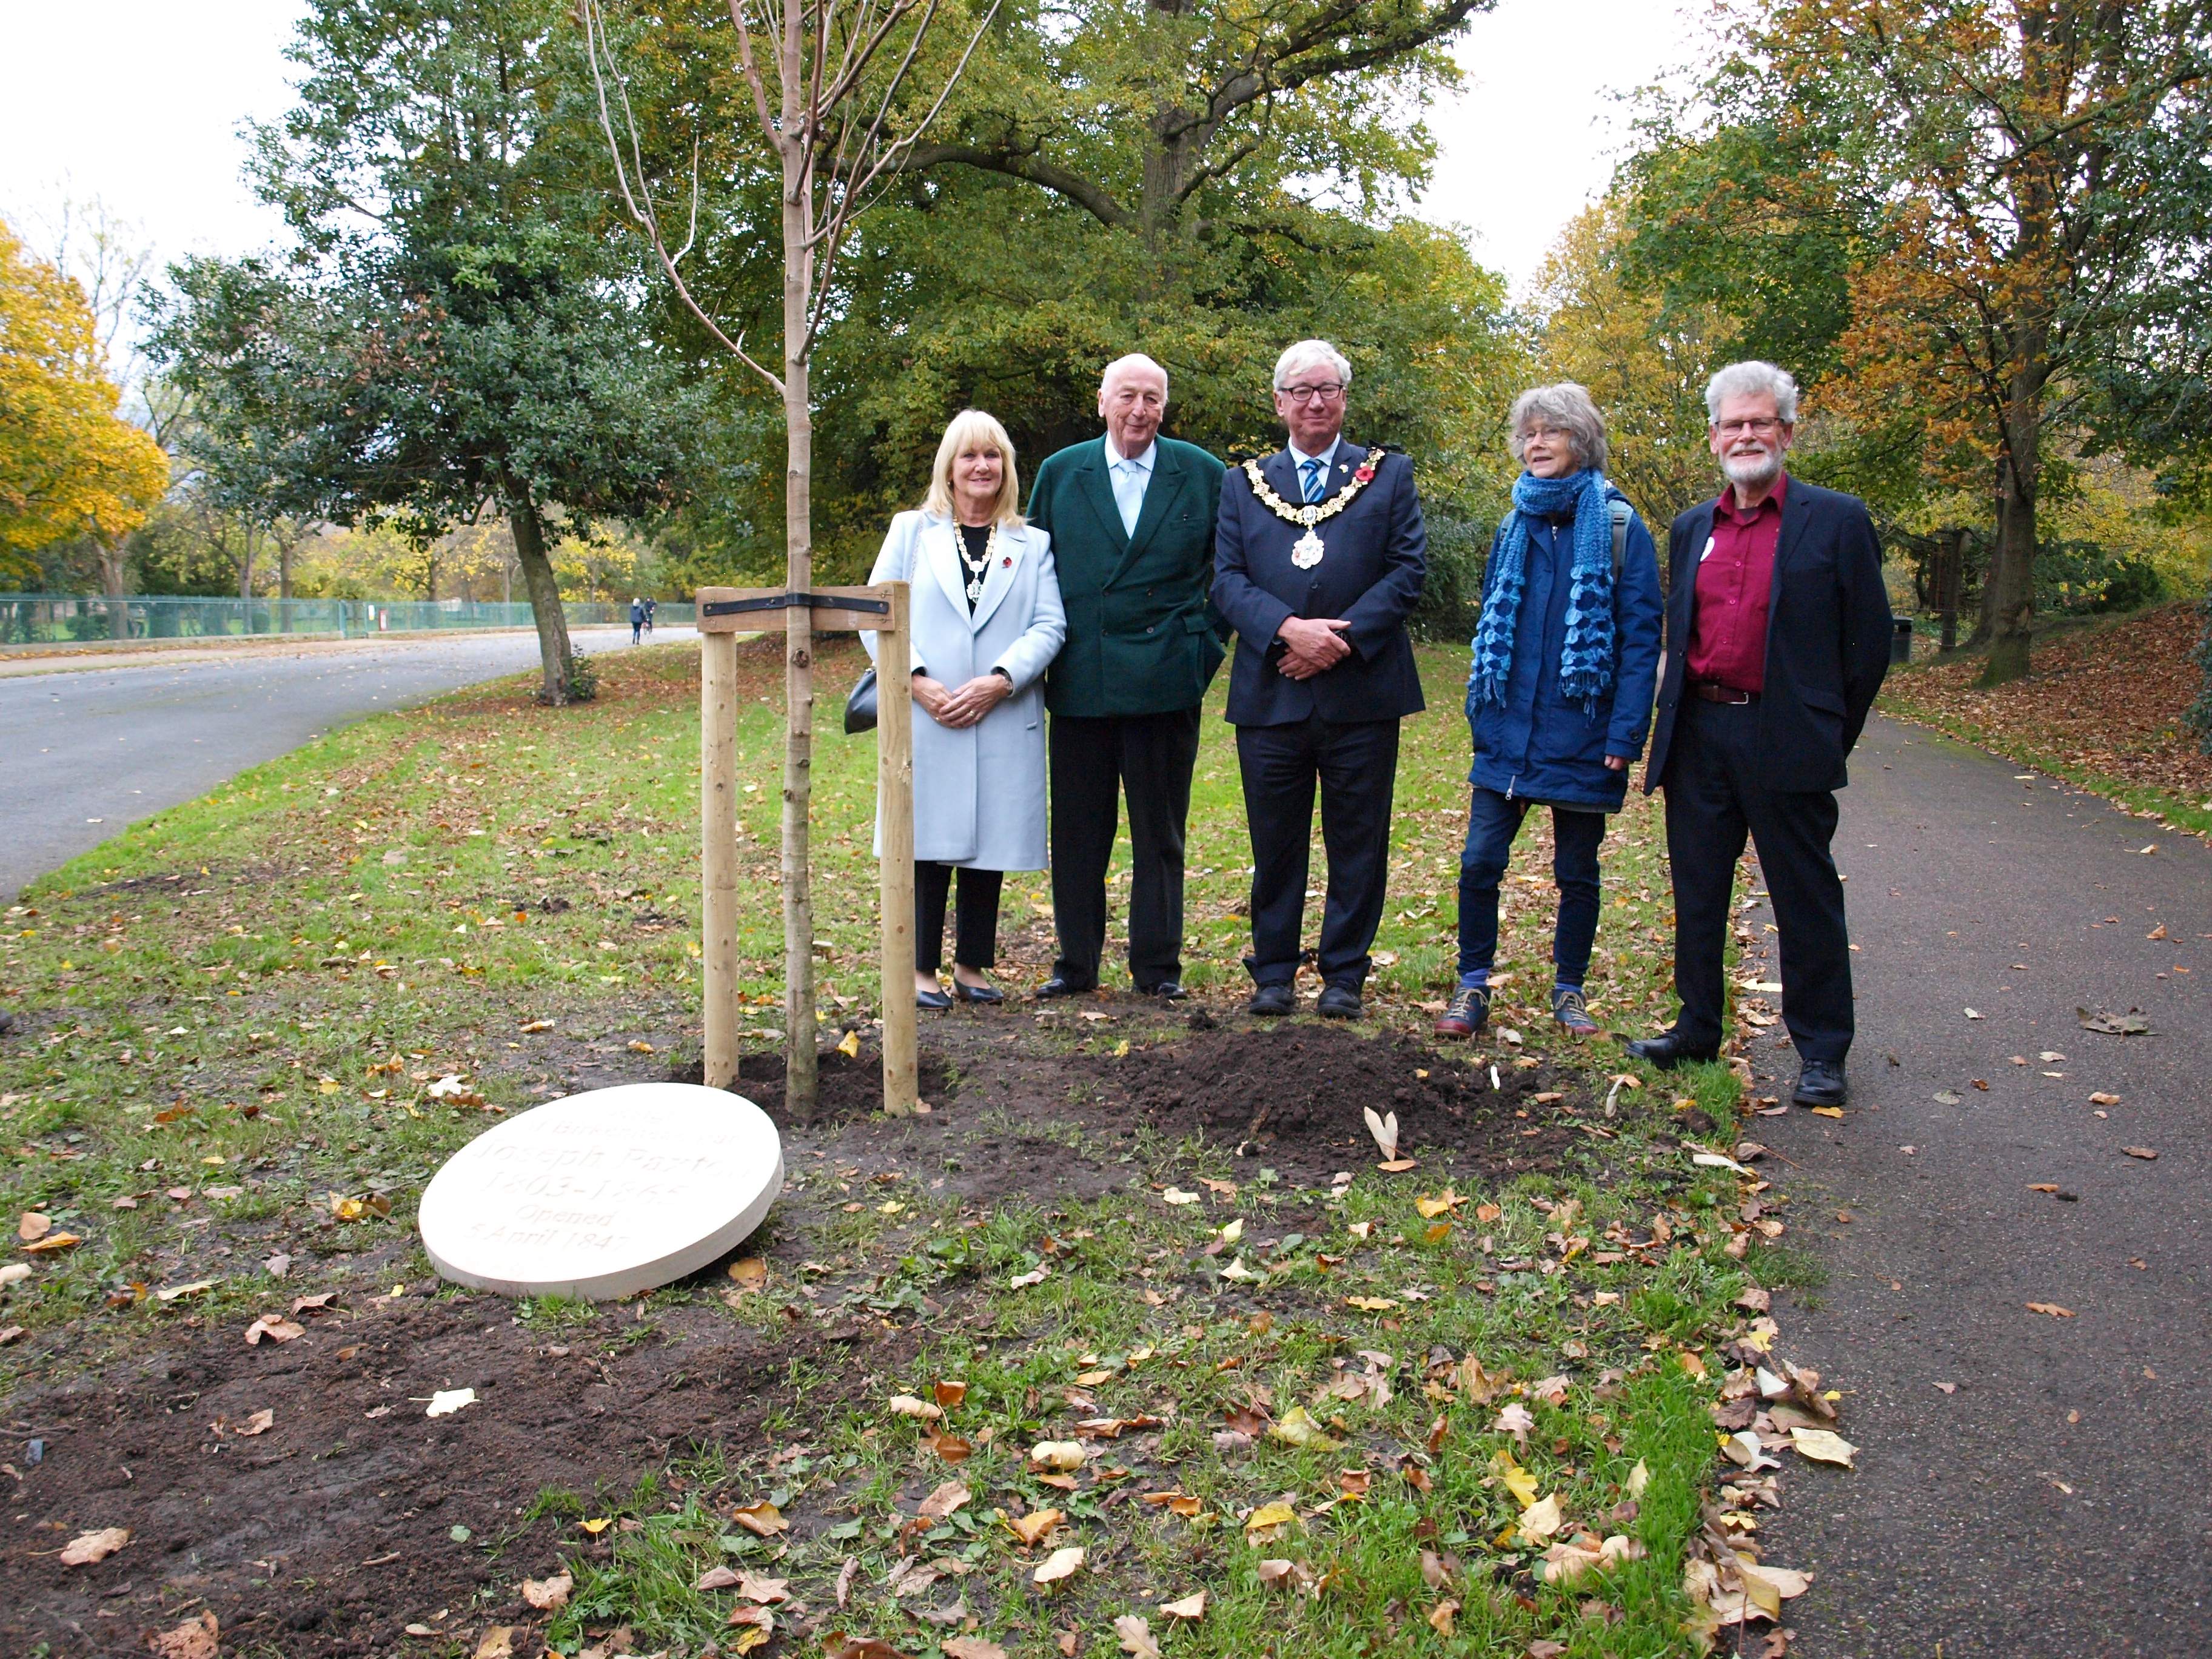 The Chinese Tulip tree planted by the Duke in Birkenhead Park